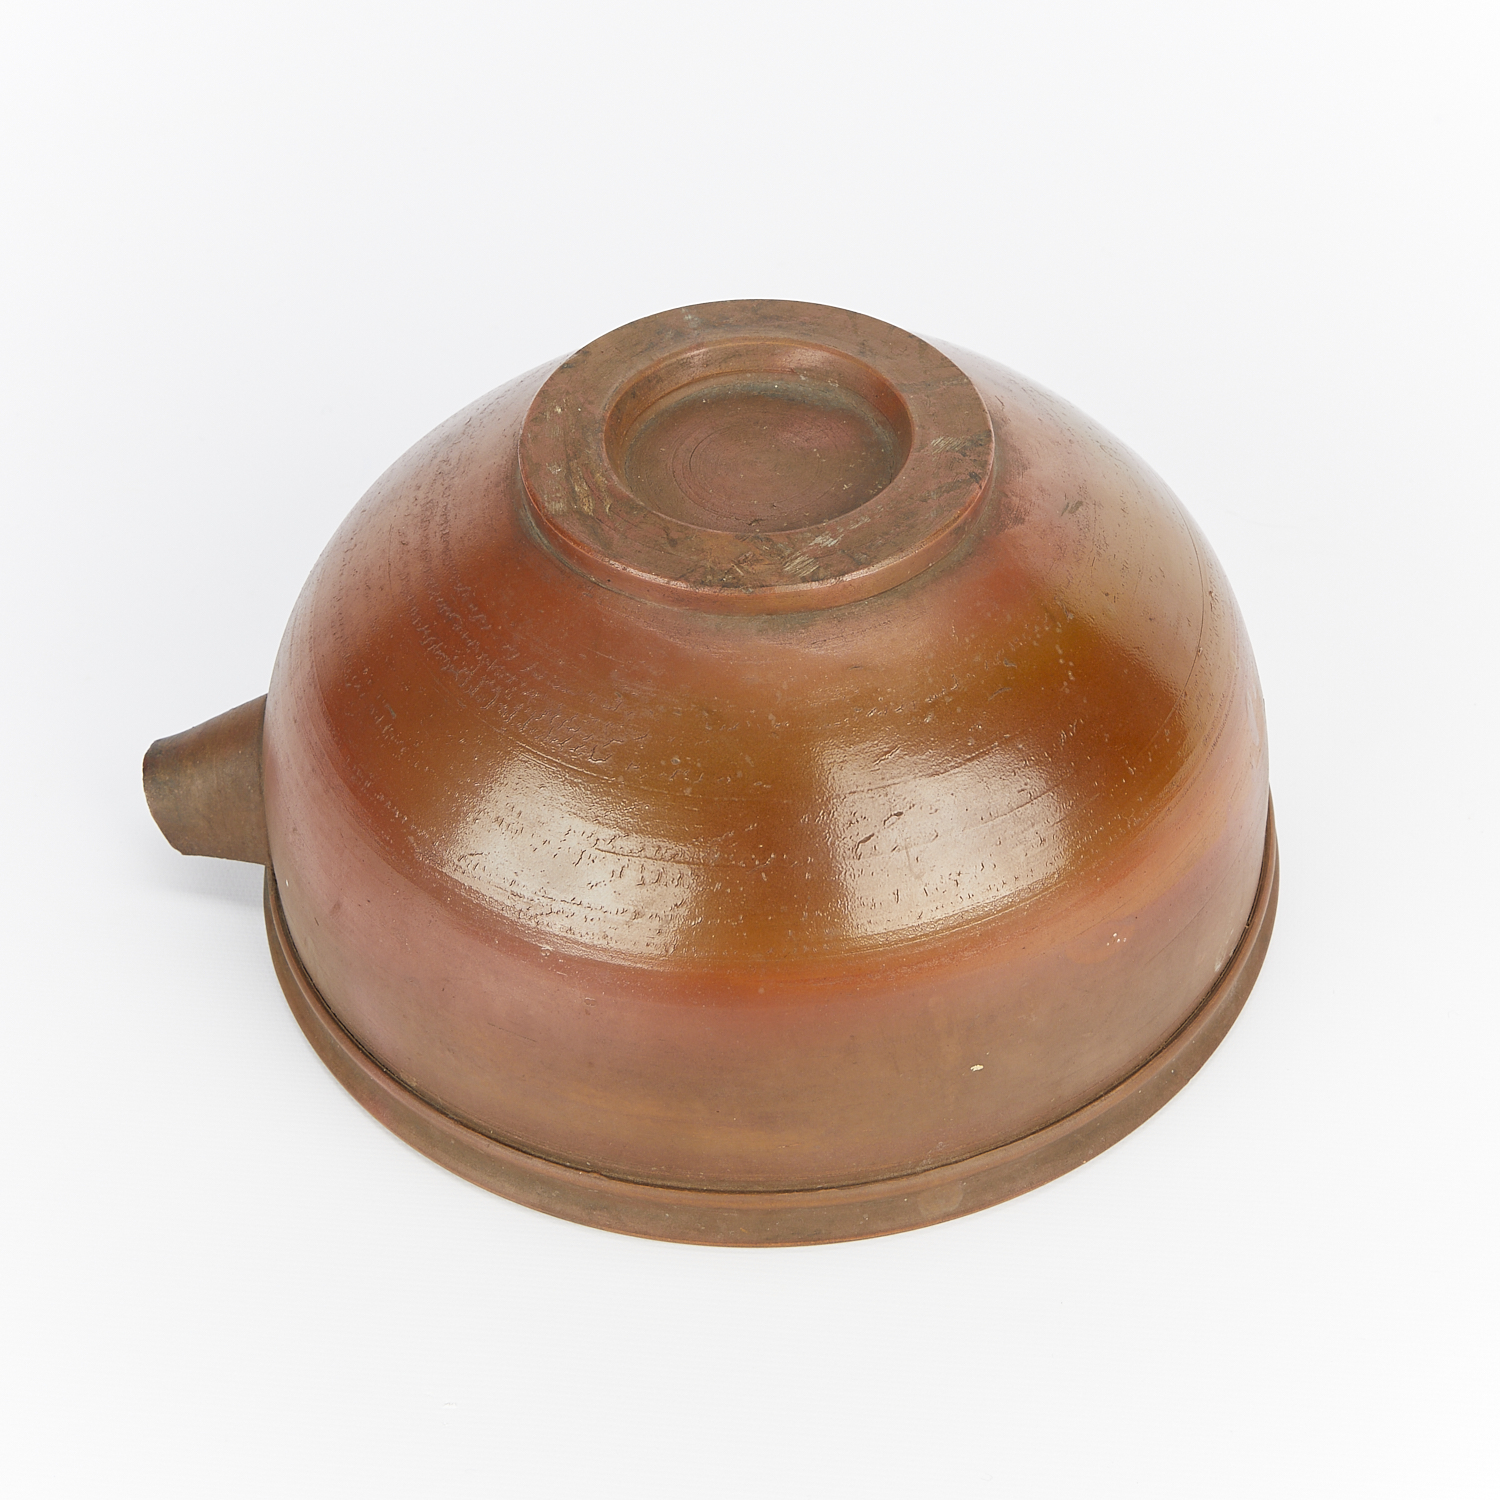 Early Japanese Mizusashi Water Jar with Spout - Image 12 of 14